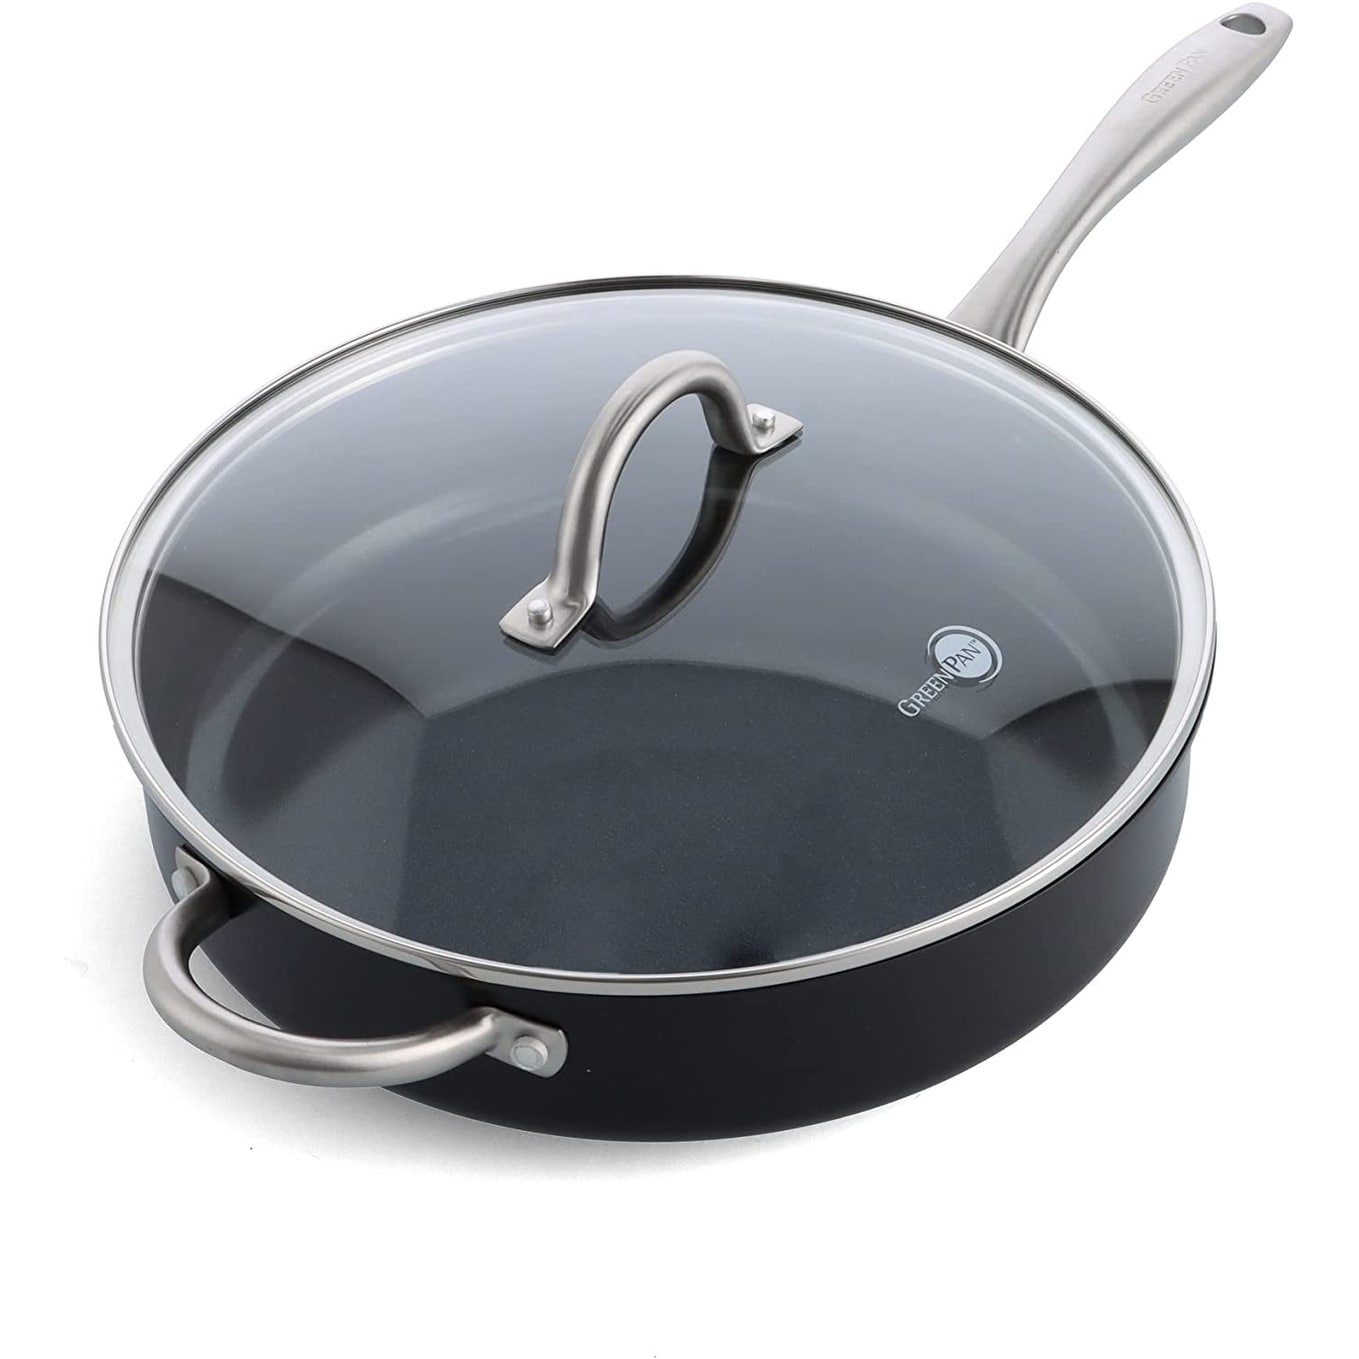 https://ak1.ostkcdn.com/images/products/is/images/direct/765bd60953b12d5d7636f198e72bb0263f5d2155/GreenPan-Chatham-Black-Prime-Midnight-Hard-Anodized-Healthy-Ceramic-Nonstick-11-Piece-Cookware-Pots-and-Pans-Set.jpg